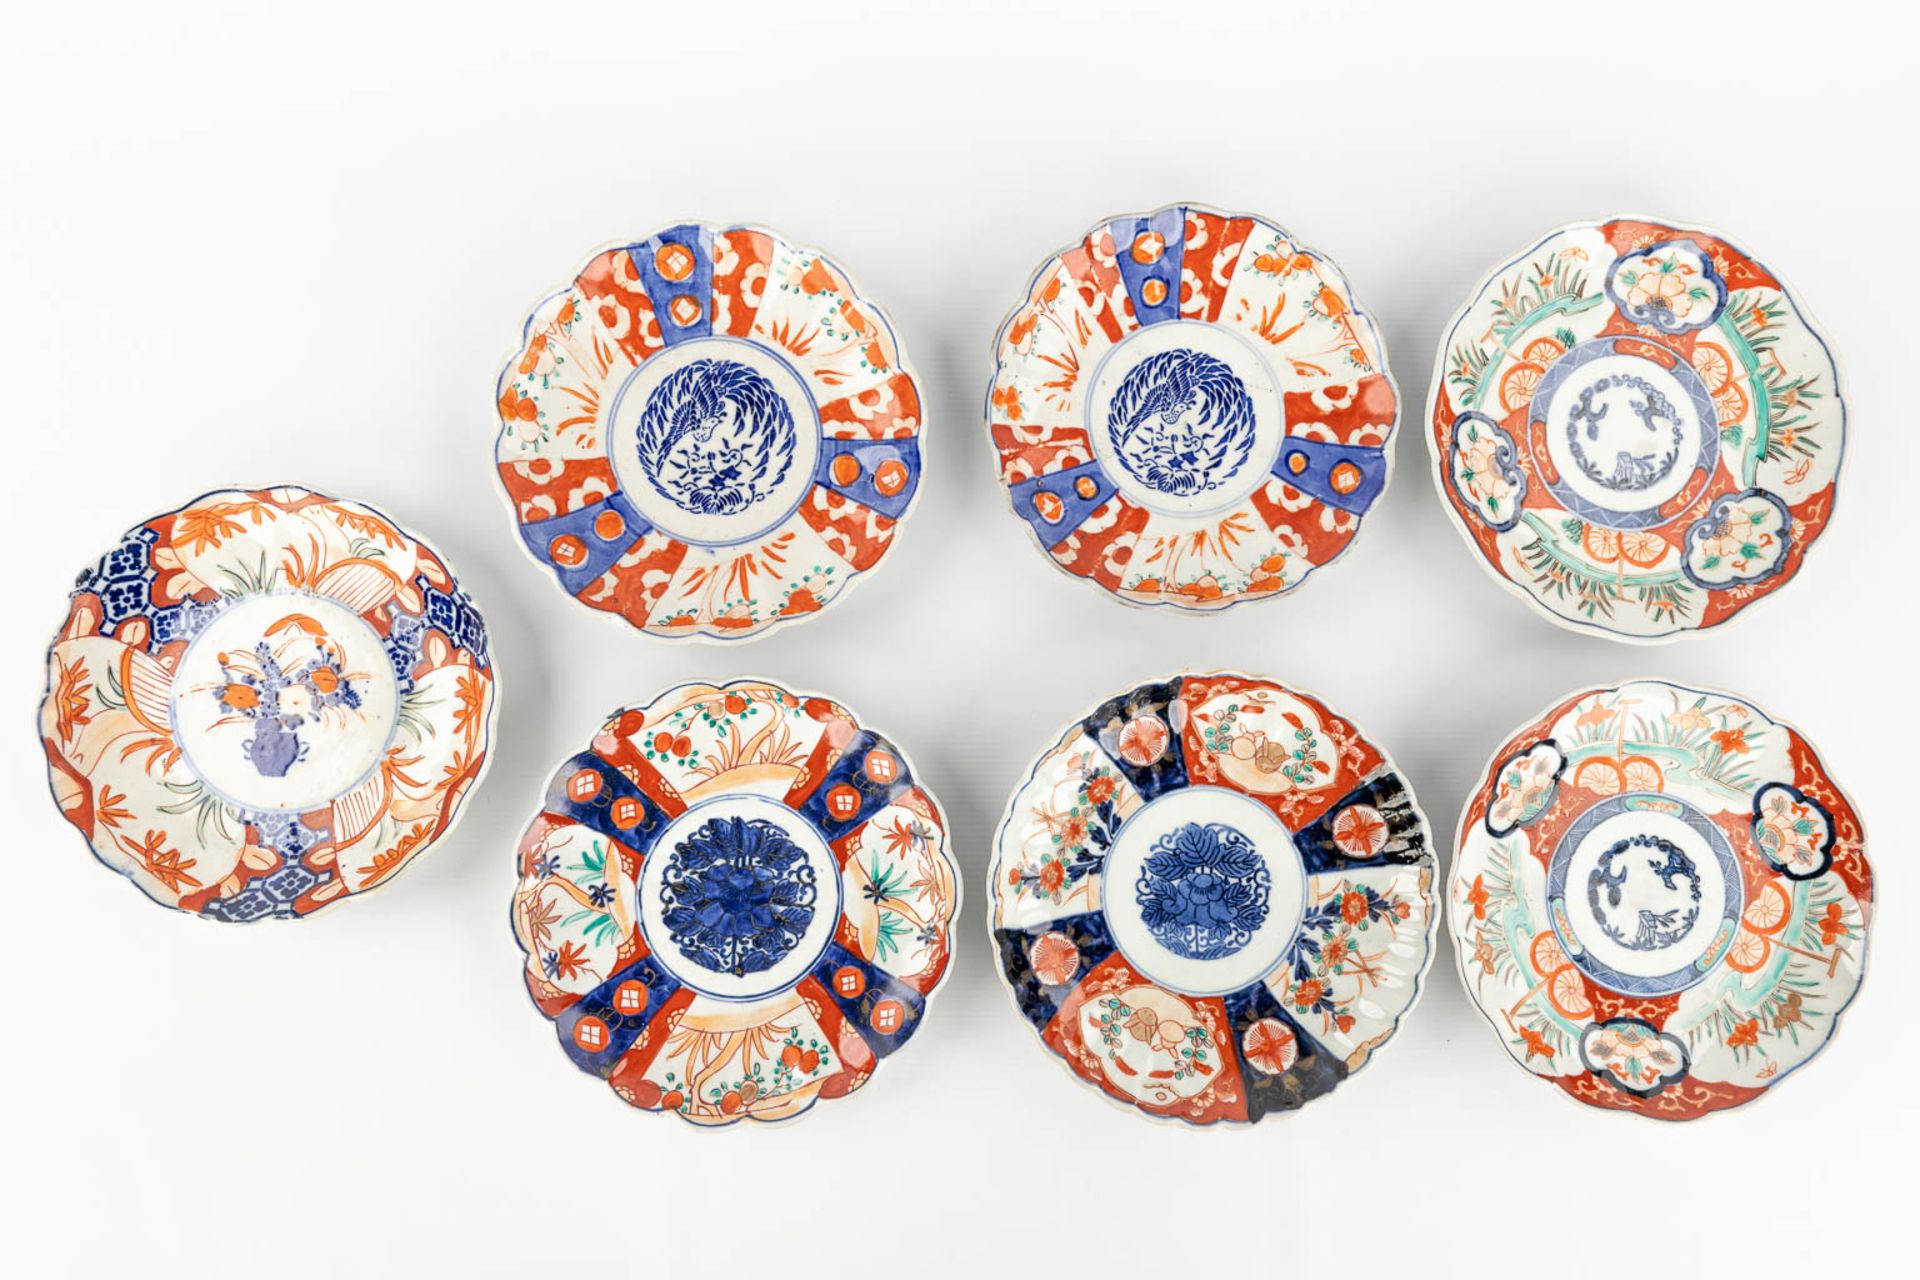 An assembled collection of Japanese Imari and Kutani porcelain. 19th/20th century. (H: 35 x D: 19 cm - Image 21 of 22